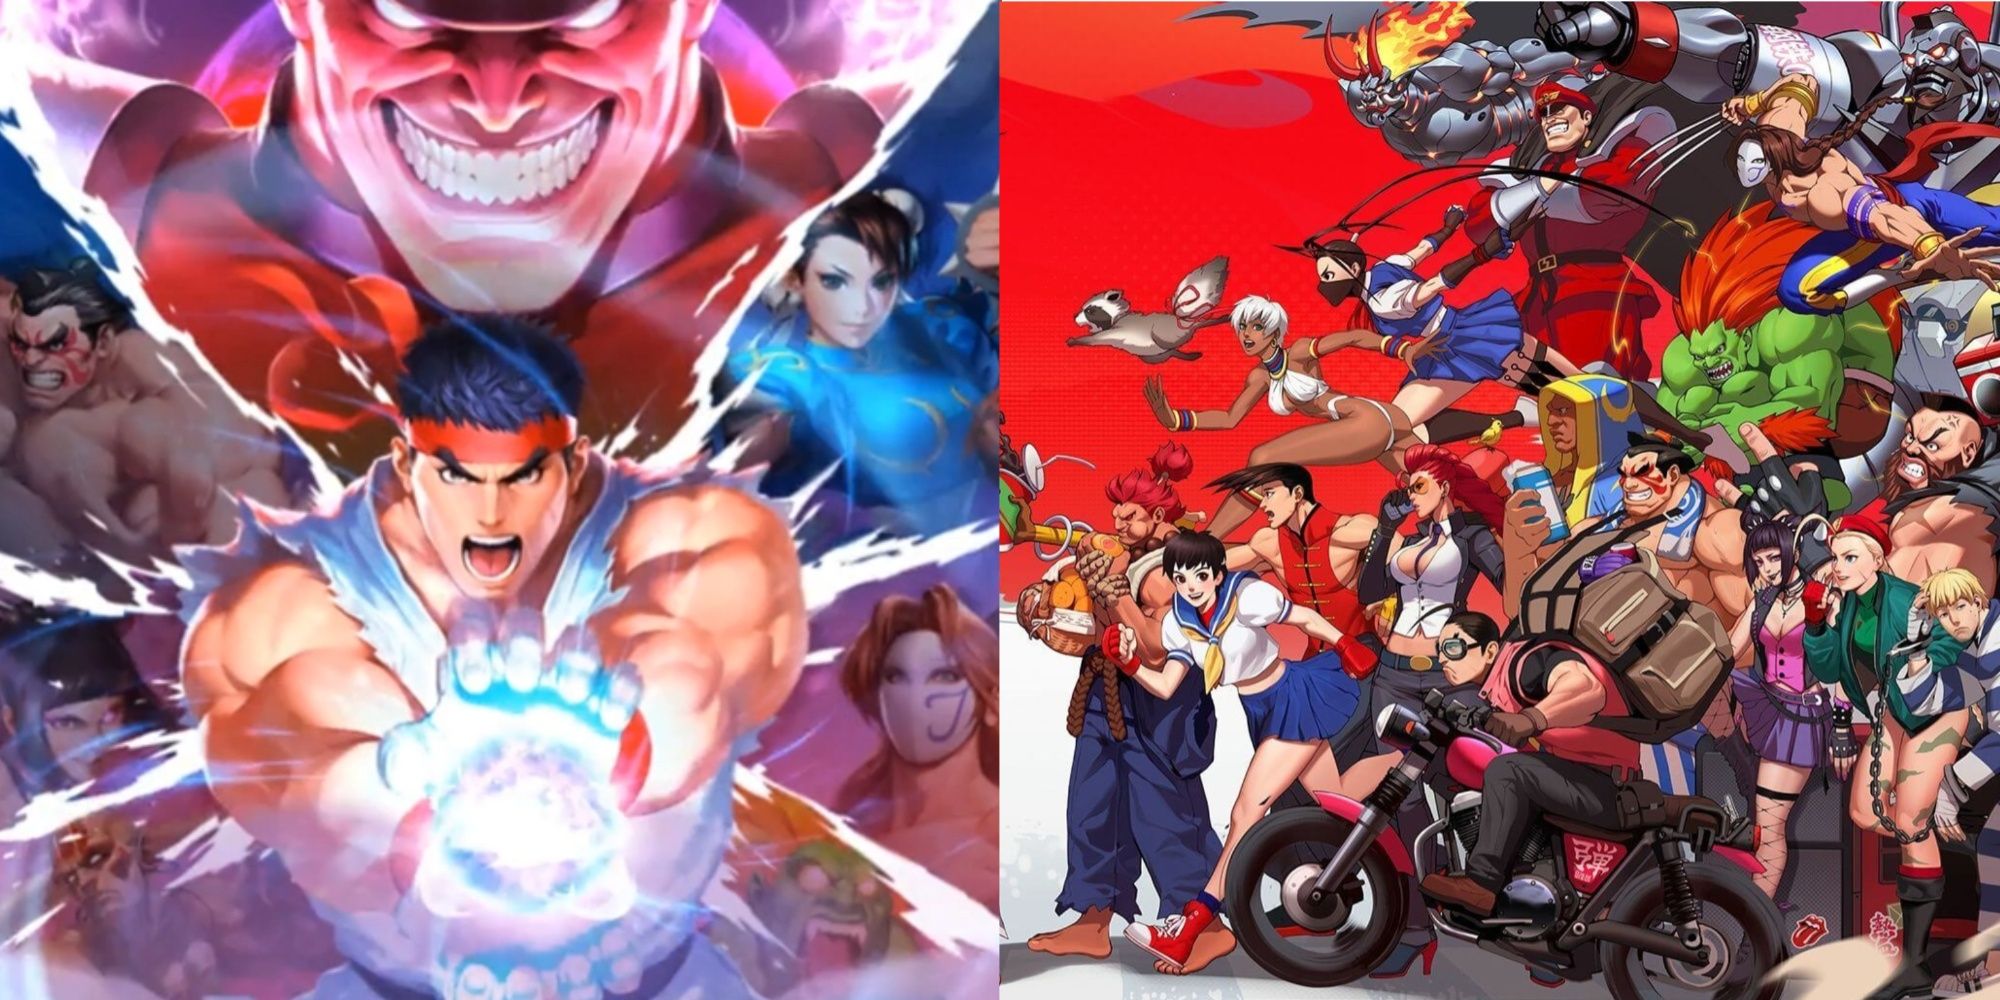 Street Fighter Duel Title Screen and Roster